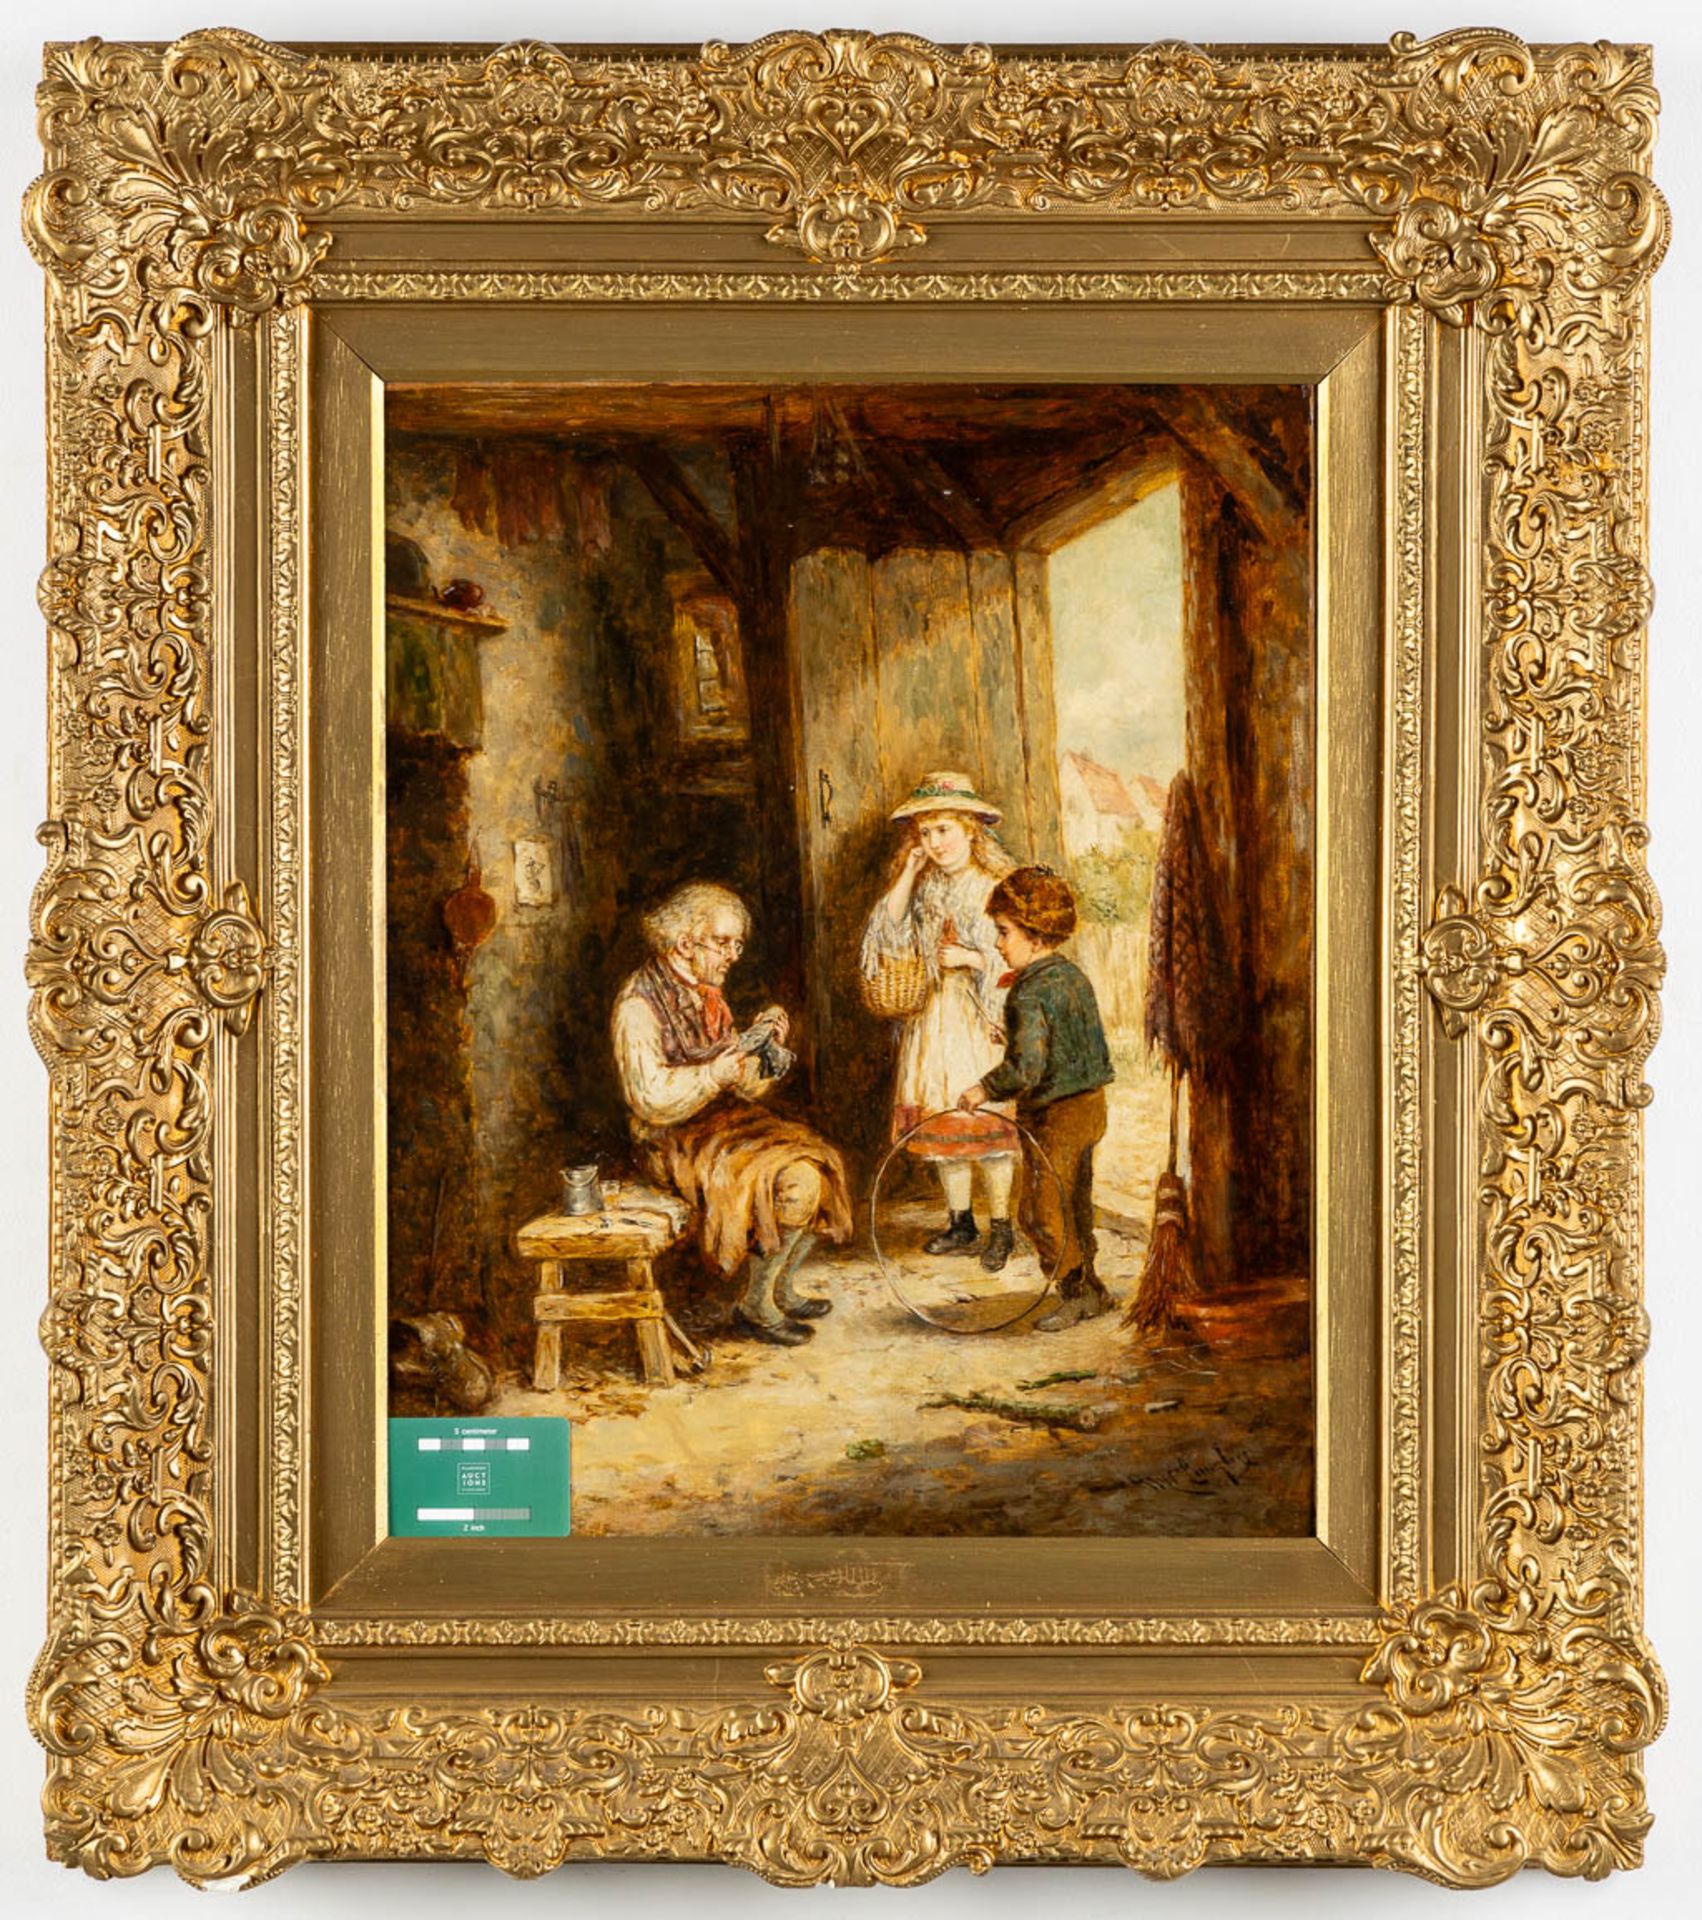 Mark William LANGLOIS (1848-1924) 'Children with a shoemaker' oil on canvas. (W:44 x H:54 cm) - Image 2 of 7